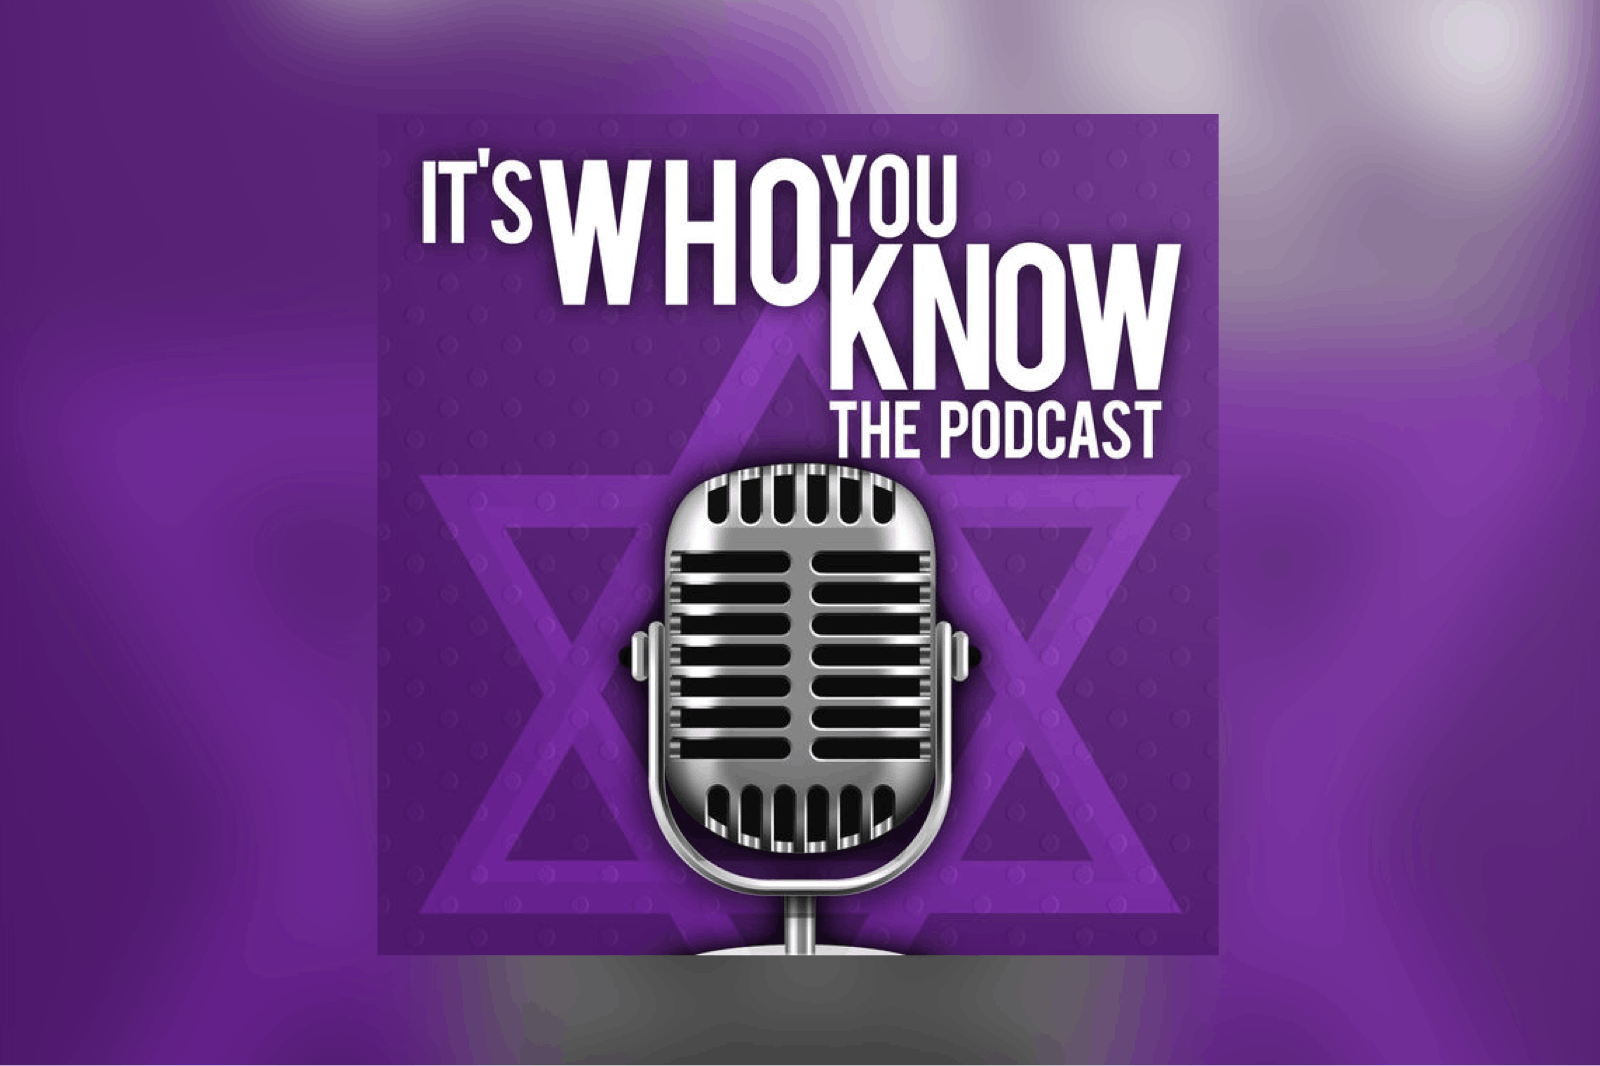 Illustration of a microphone "It's Who You Know the Podcast"